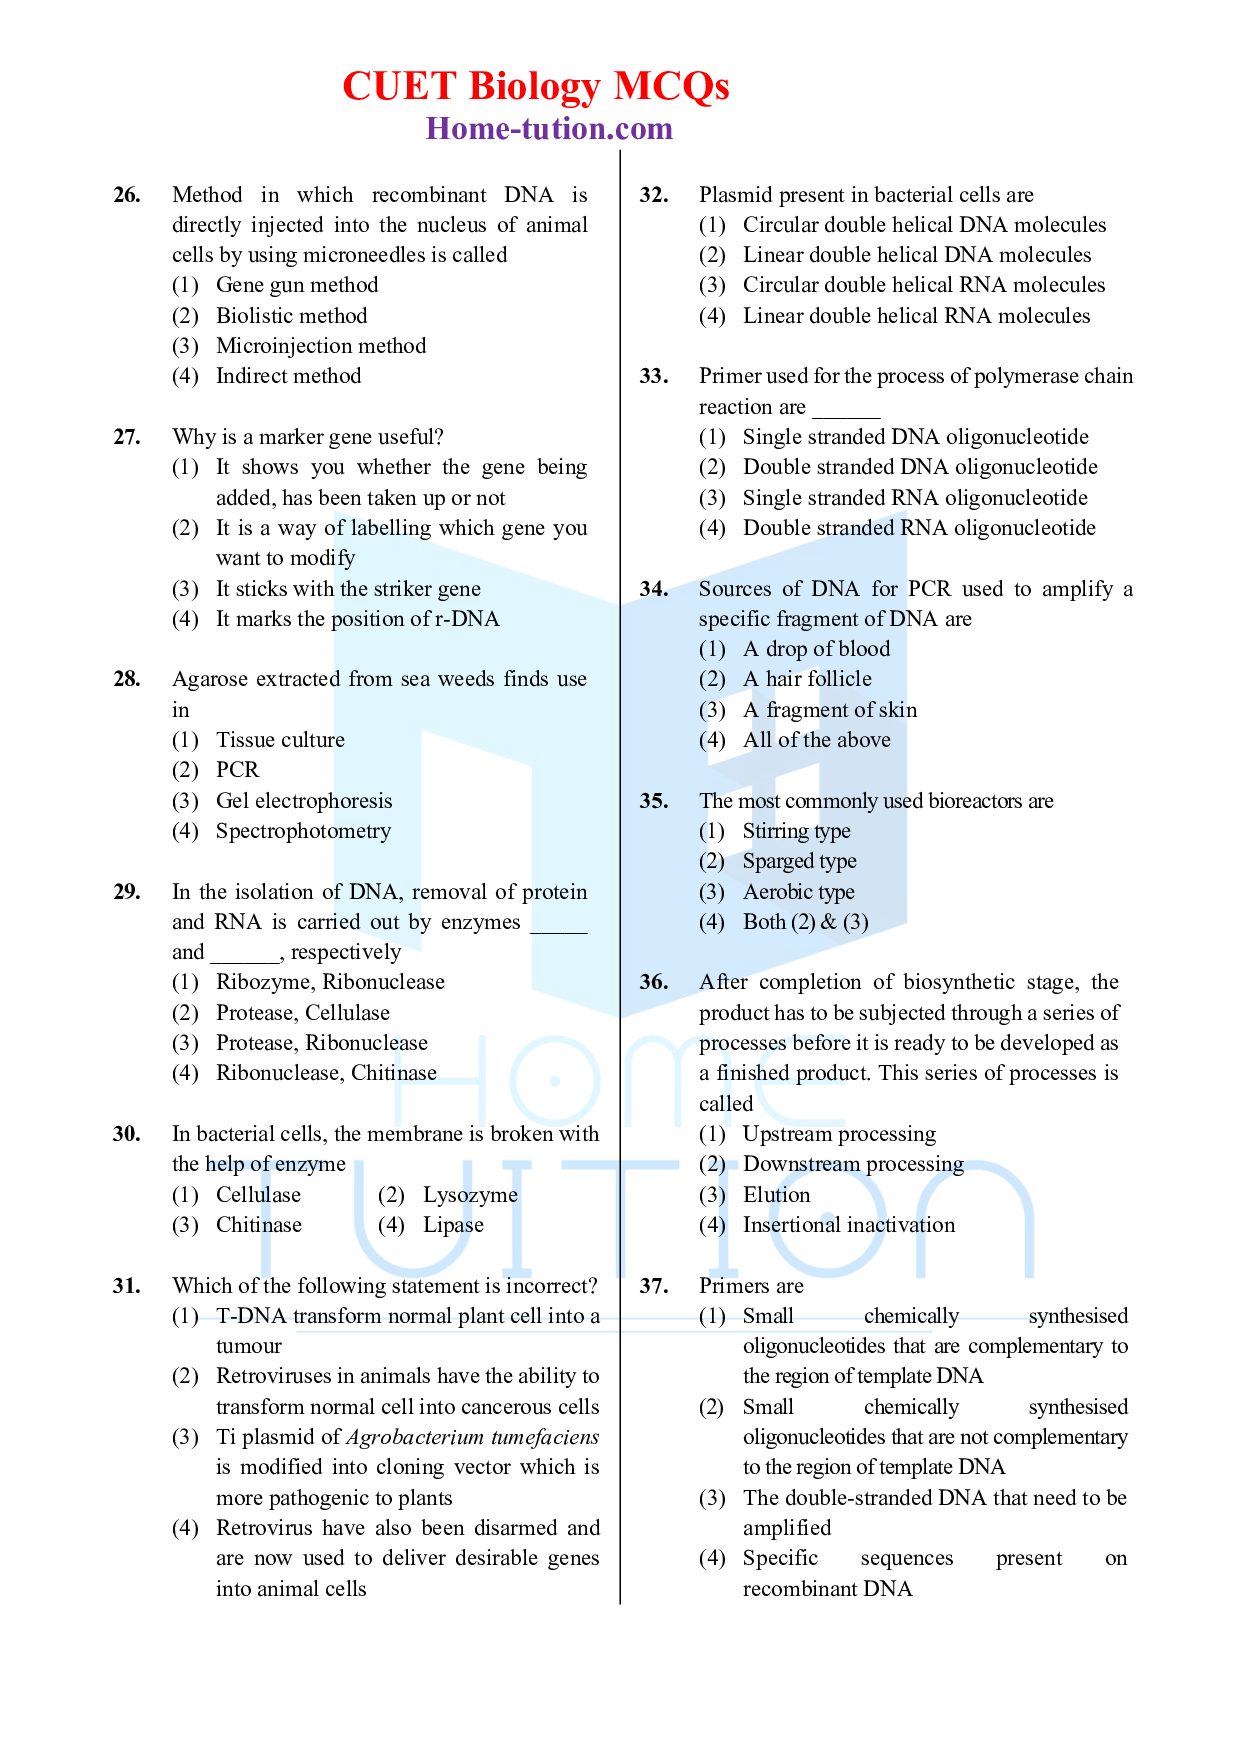 Biology MCQ Questions for CUET Chapter 11 Biotechnology Principles and Processes